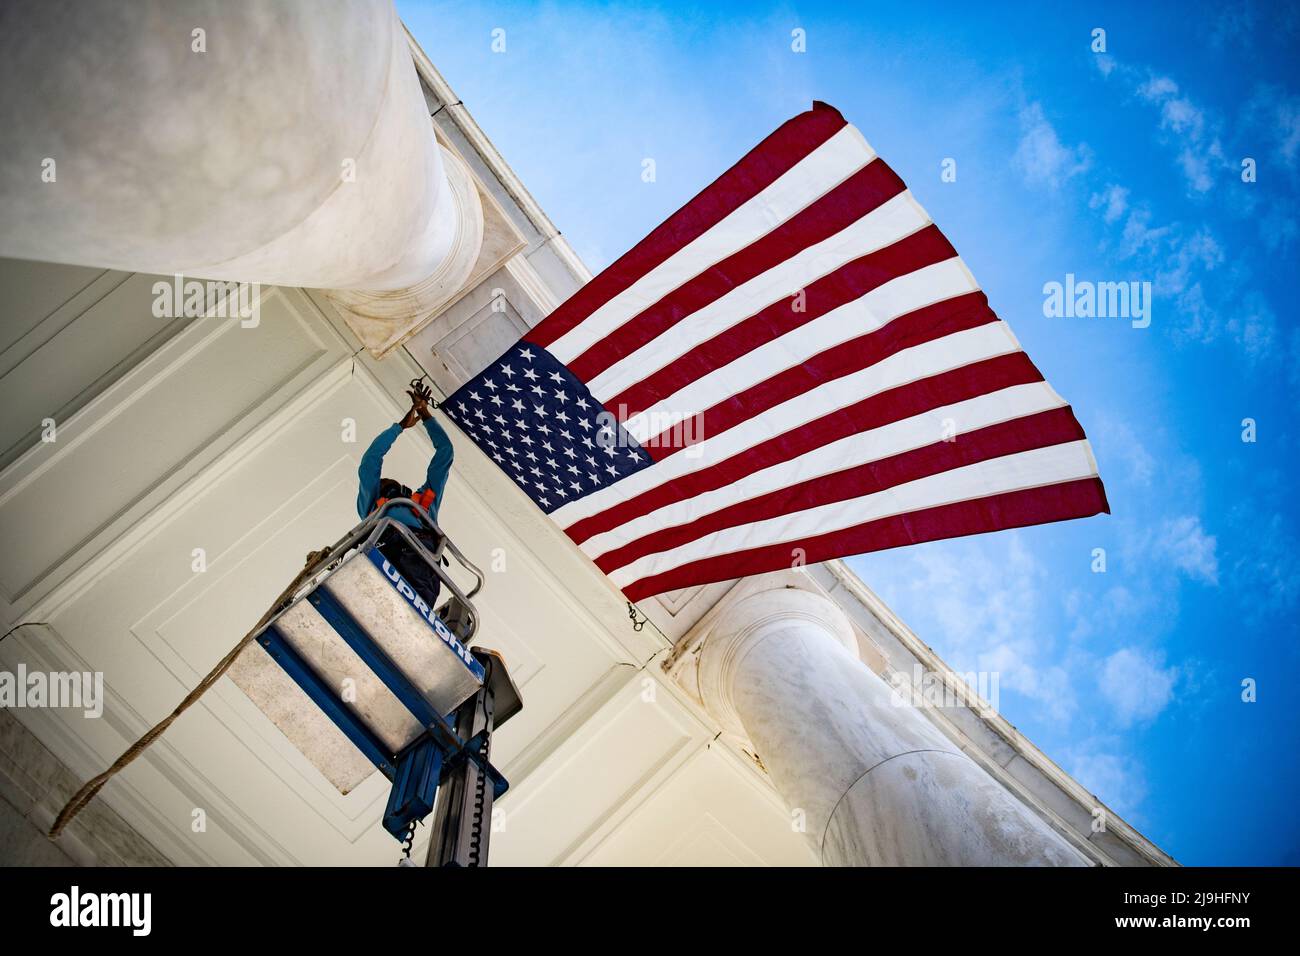 Arlington, United States Of America. 23rd May, 2022. Arlington, United States of America. 23 May, 2022. Facilities maintenance employees hang American flags in the Arlington National Cemetery Memorial Amphitheater in preparation for the annual Memorial Day event honoring the nations war dead, May 23, 2022 in Arlington, Virginia, USA. Credit: Elizabeth Fraser/U.S. Army/Alamy Live News Stock Photo